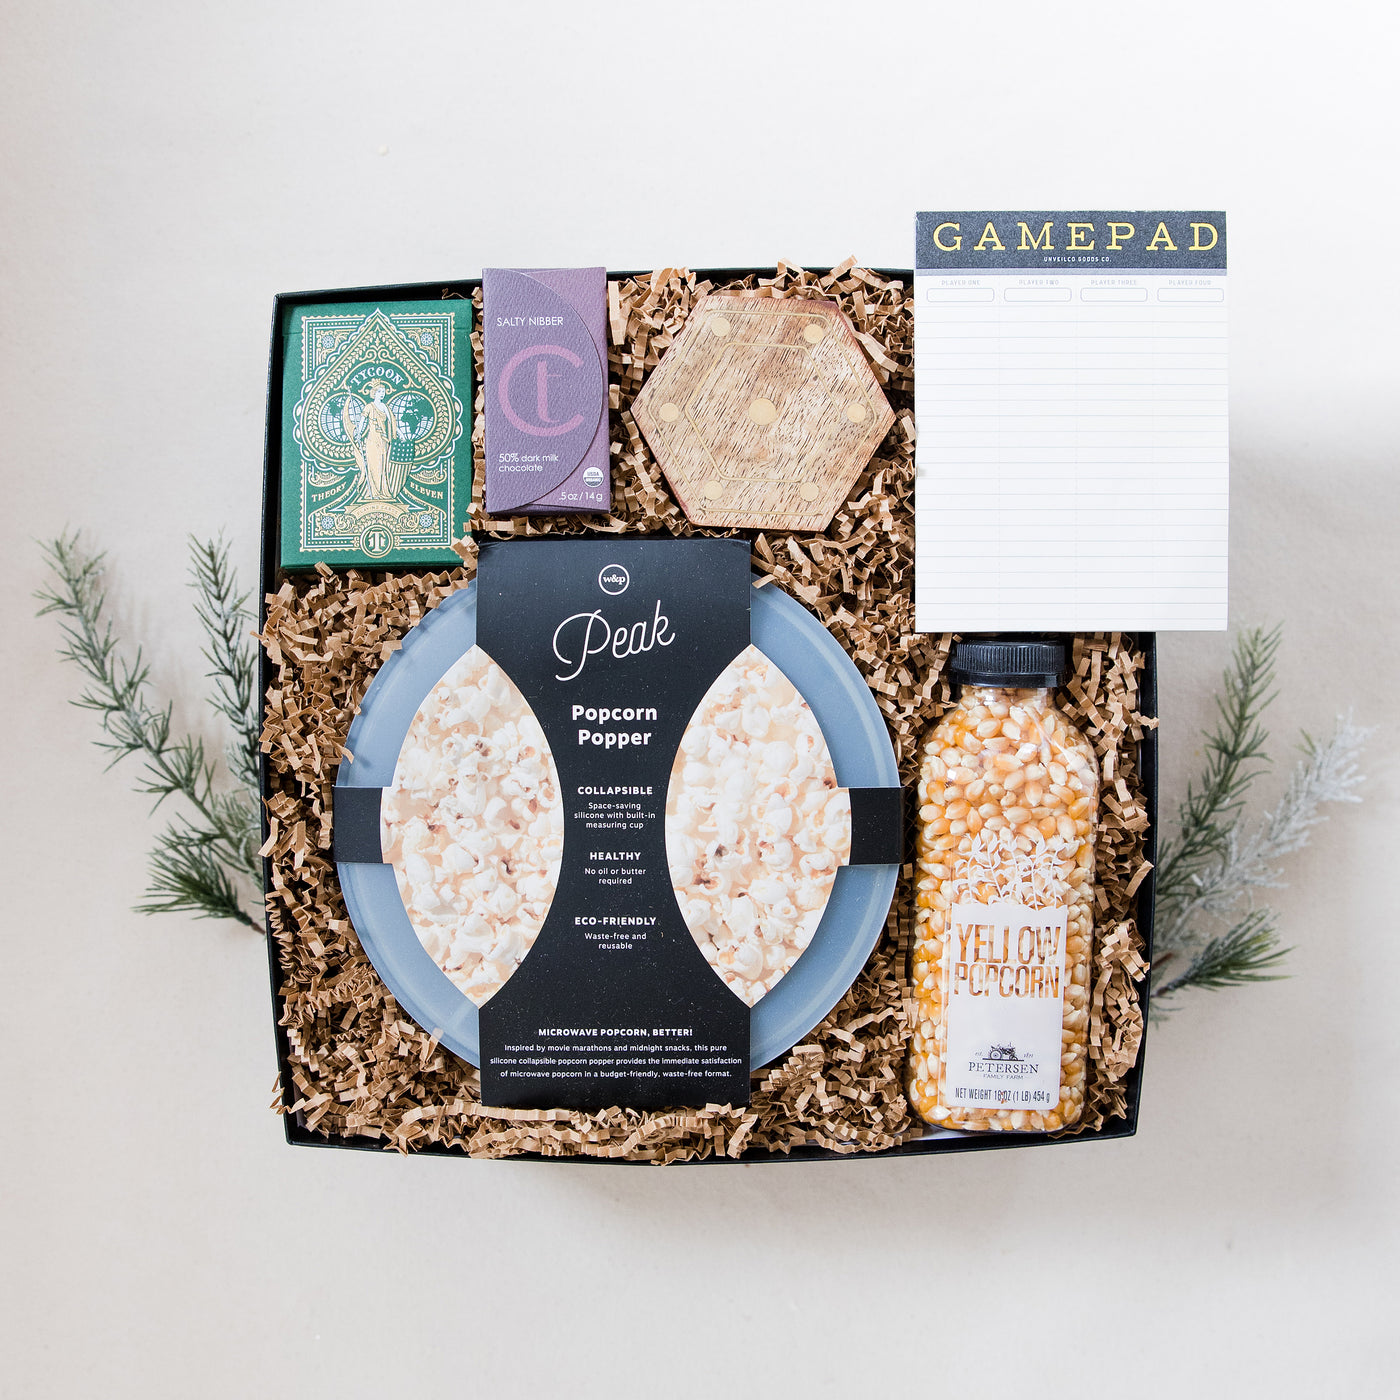 A clever and playful gift to help foster connection at home. This gift box includes all the makings of an amazing game night!